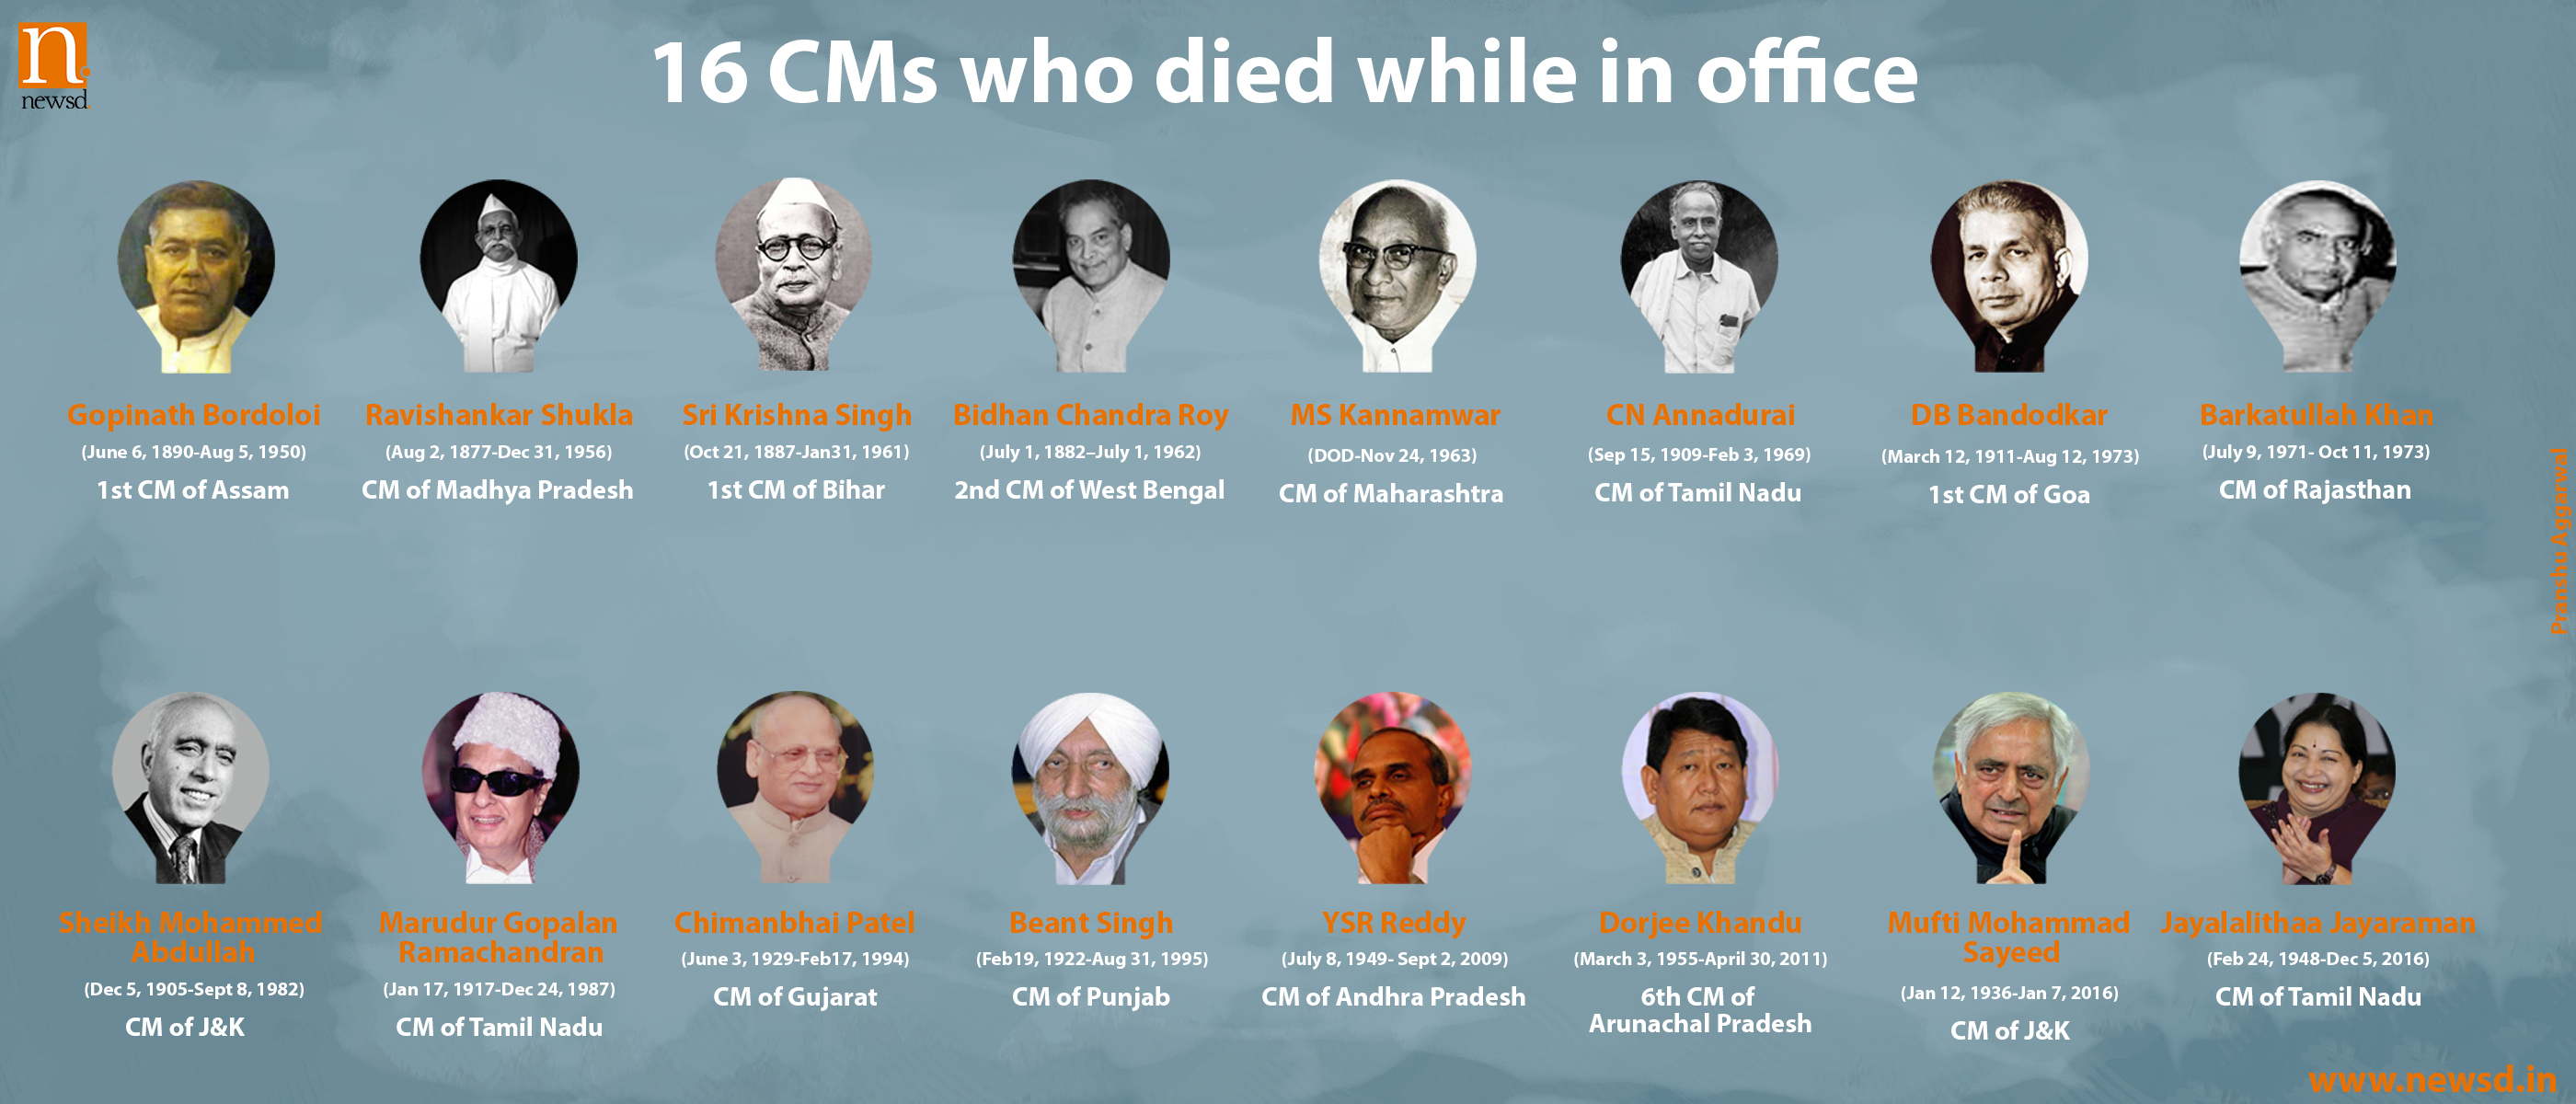 16-cms-died-while-in-office-1